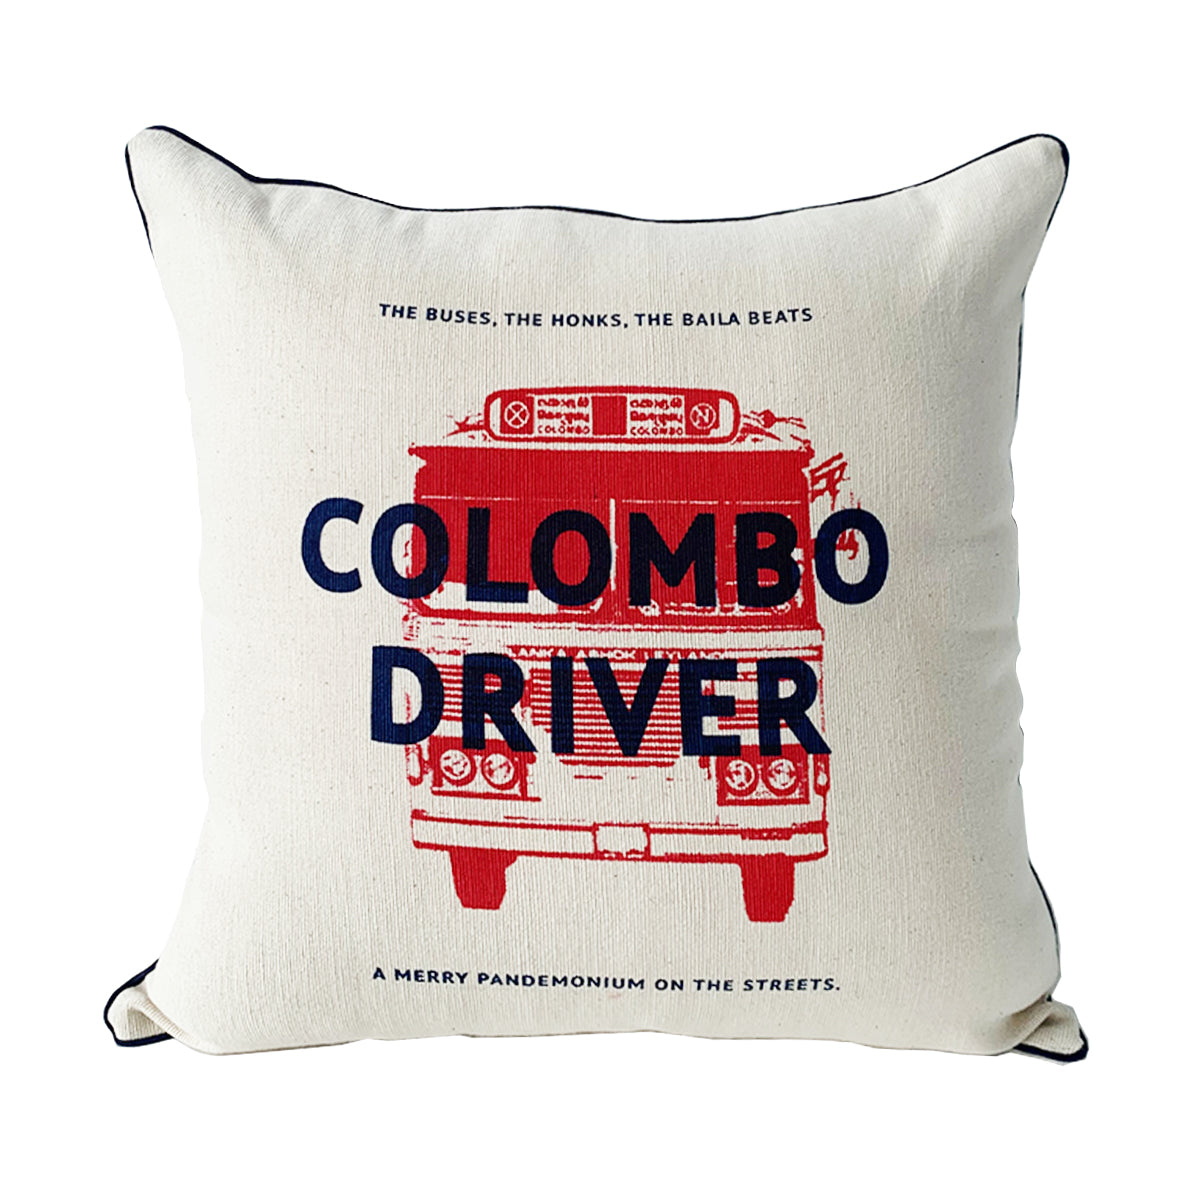 City Graphics - Colombo Driver Cushion Cover